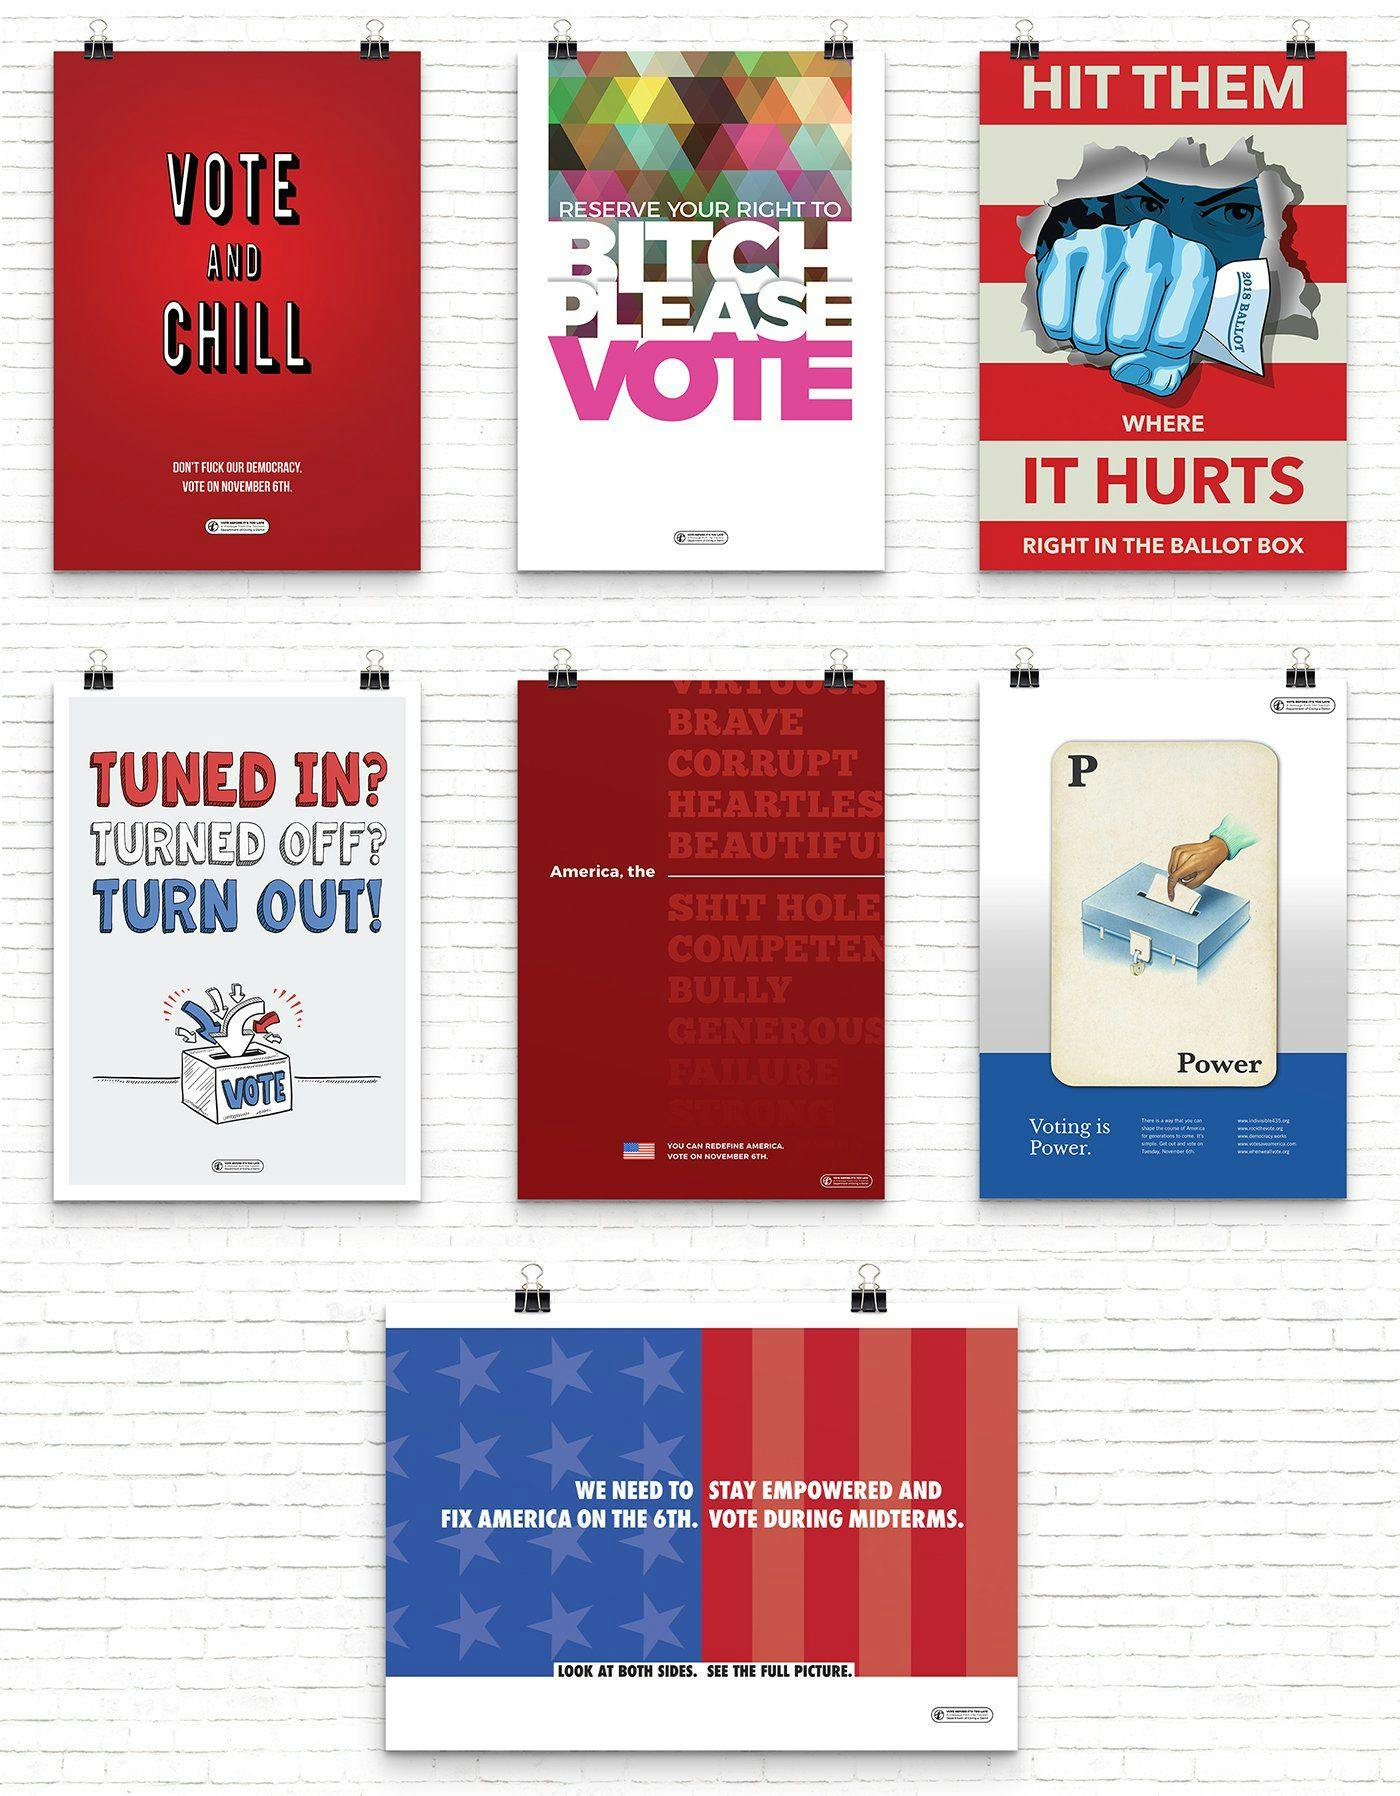 All voting posters